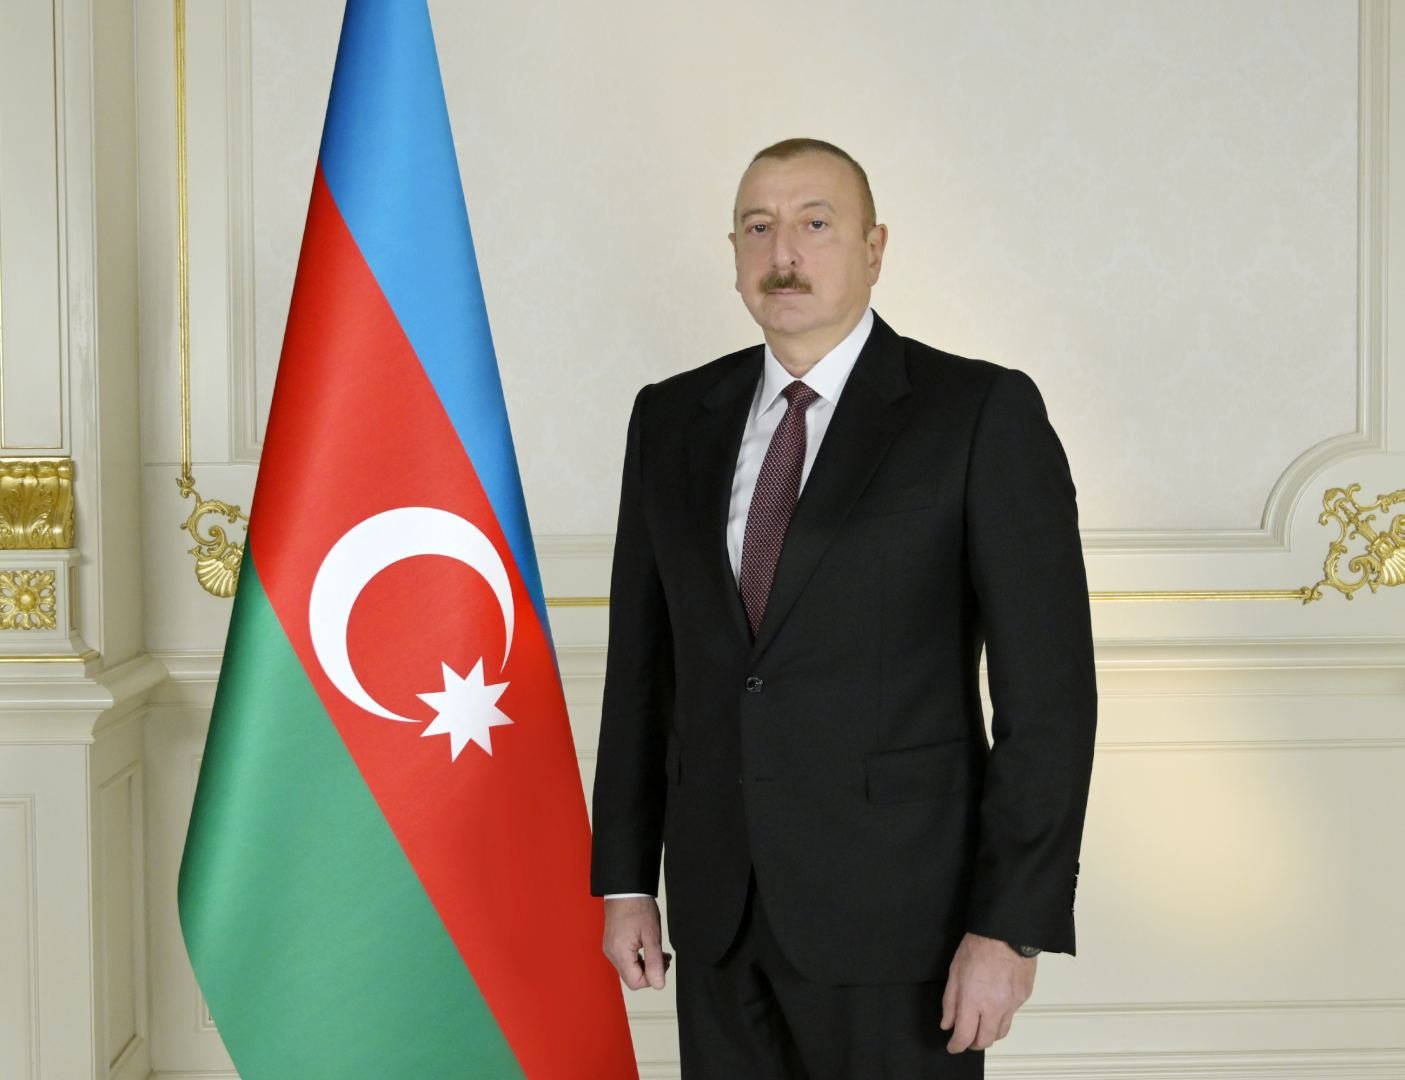 People of Azerbaijan united like fist and expelled enemy from our native land - President Ilham Aliyev